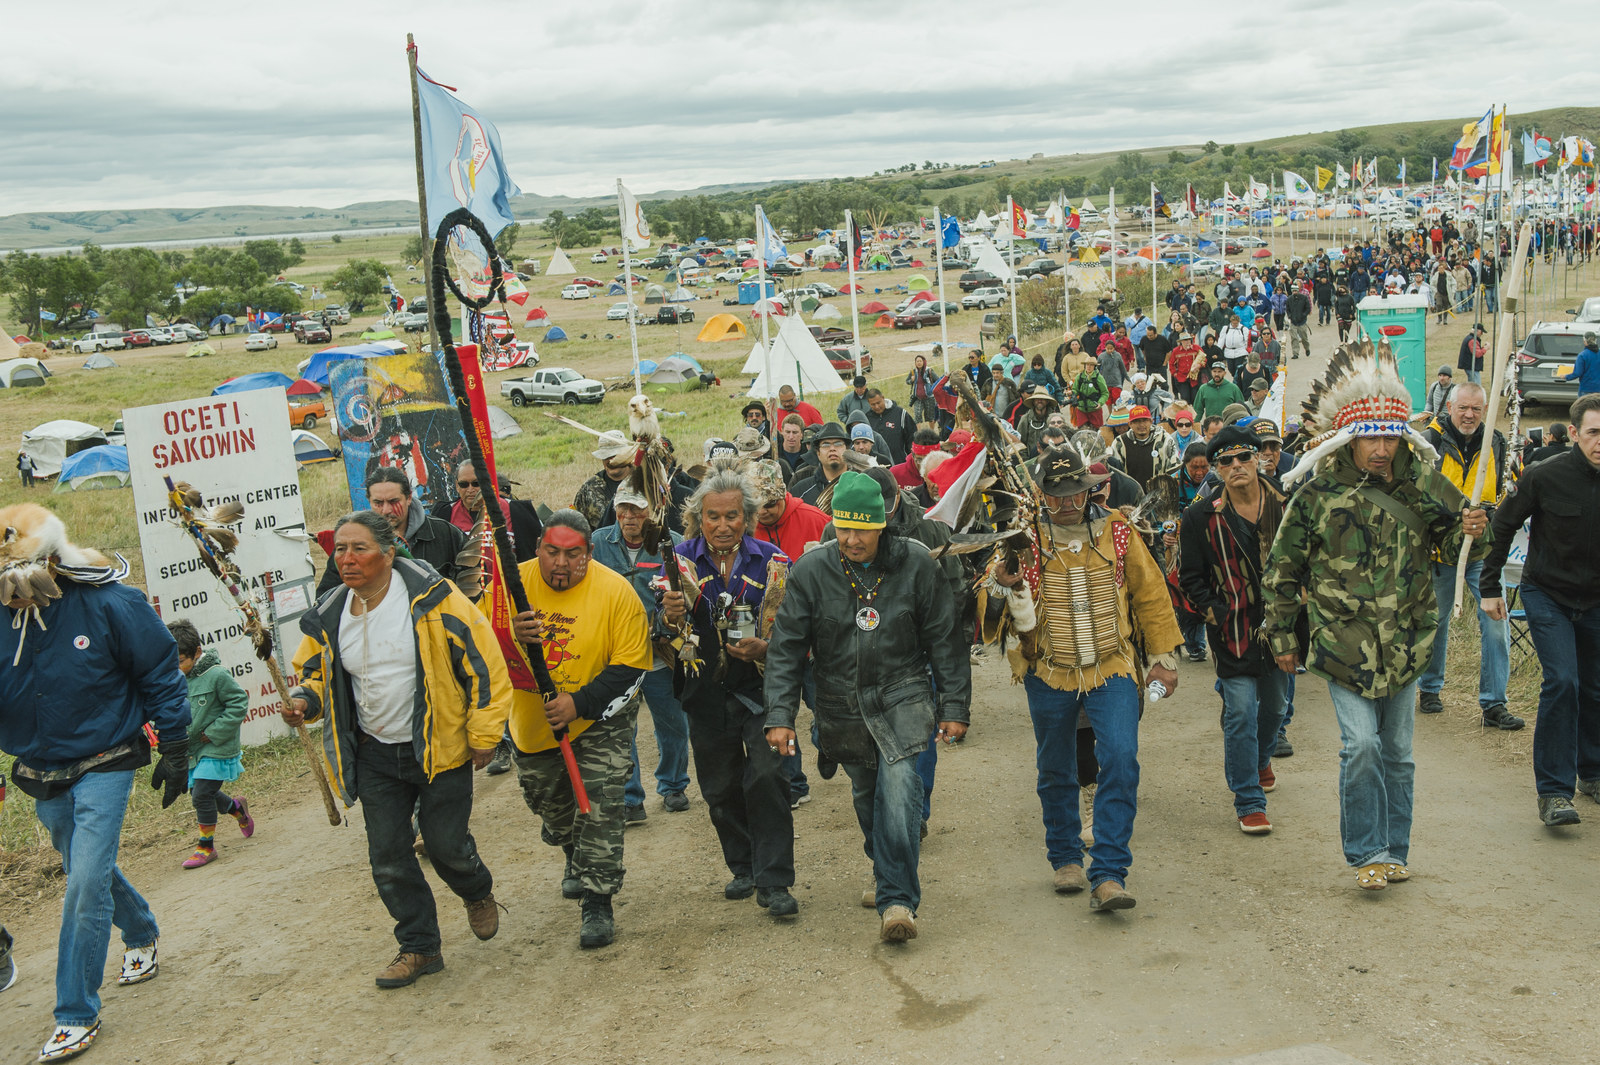 indigenous struggles, indigenous peoples, Native American protests, Standing Rock Sioux protests, Dakota Access Pipeline, Lakota Sioux, Great Sioux Nation, land sovereignty, Wounded Knee occupation, Berta Cáceres,